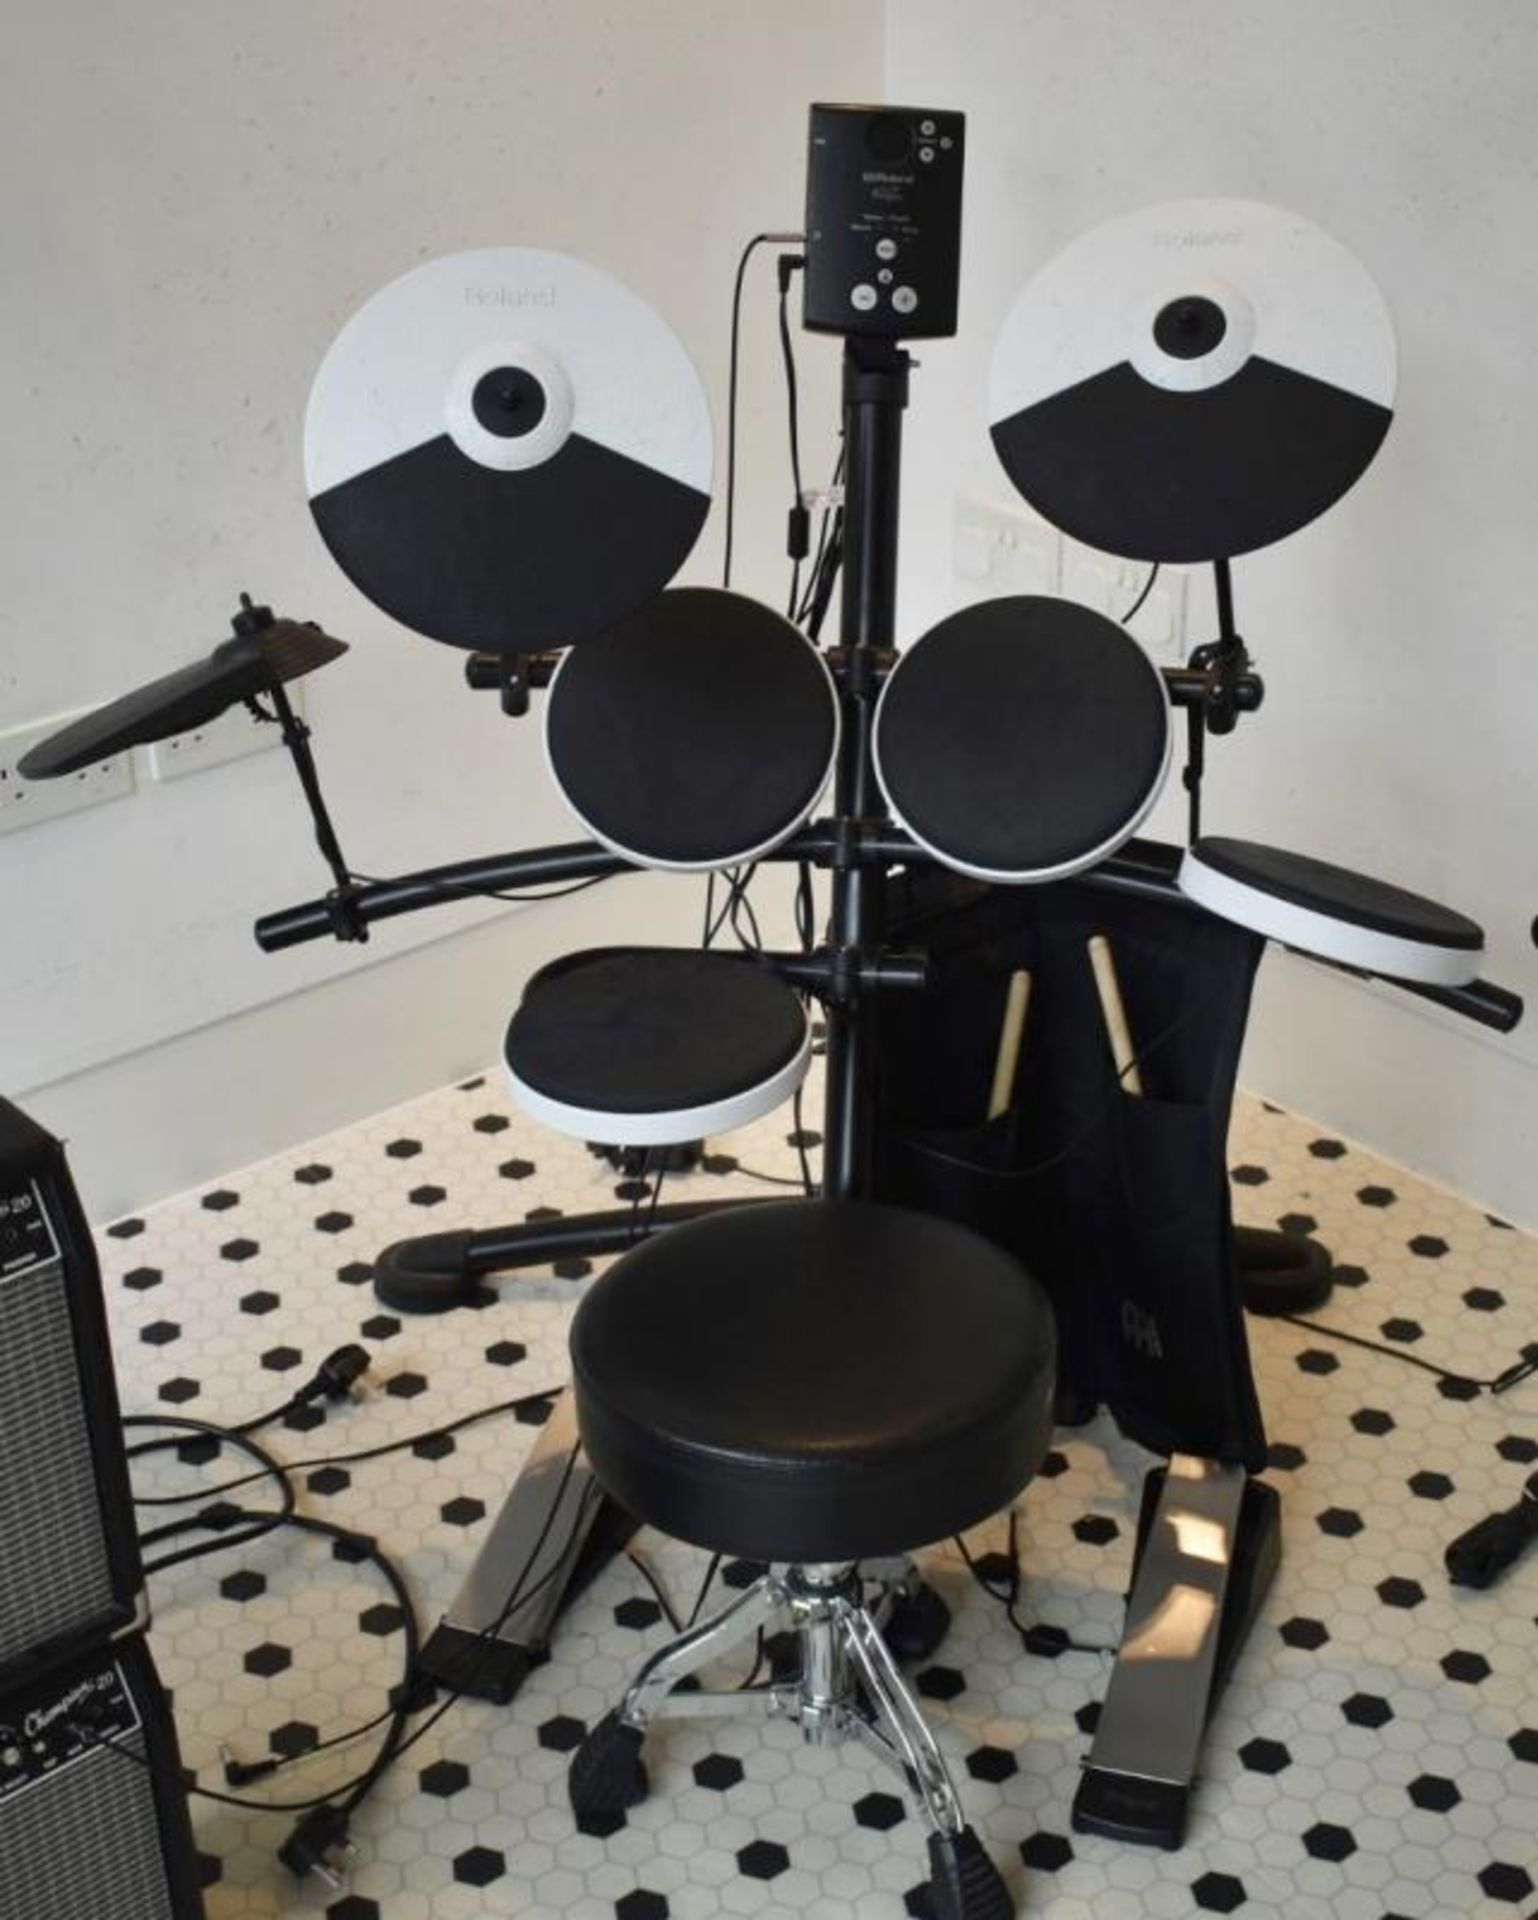 1 x Roland V-Drums Electronic Drum Kit With Stool and Stick Bag - Ref KP103 - CL489 - Location: Putn - Image 2 of 5